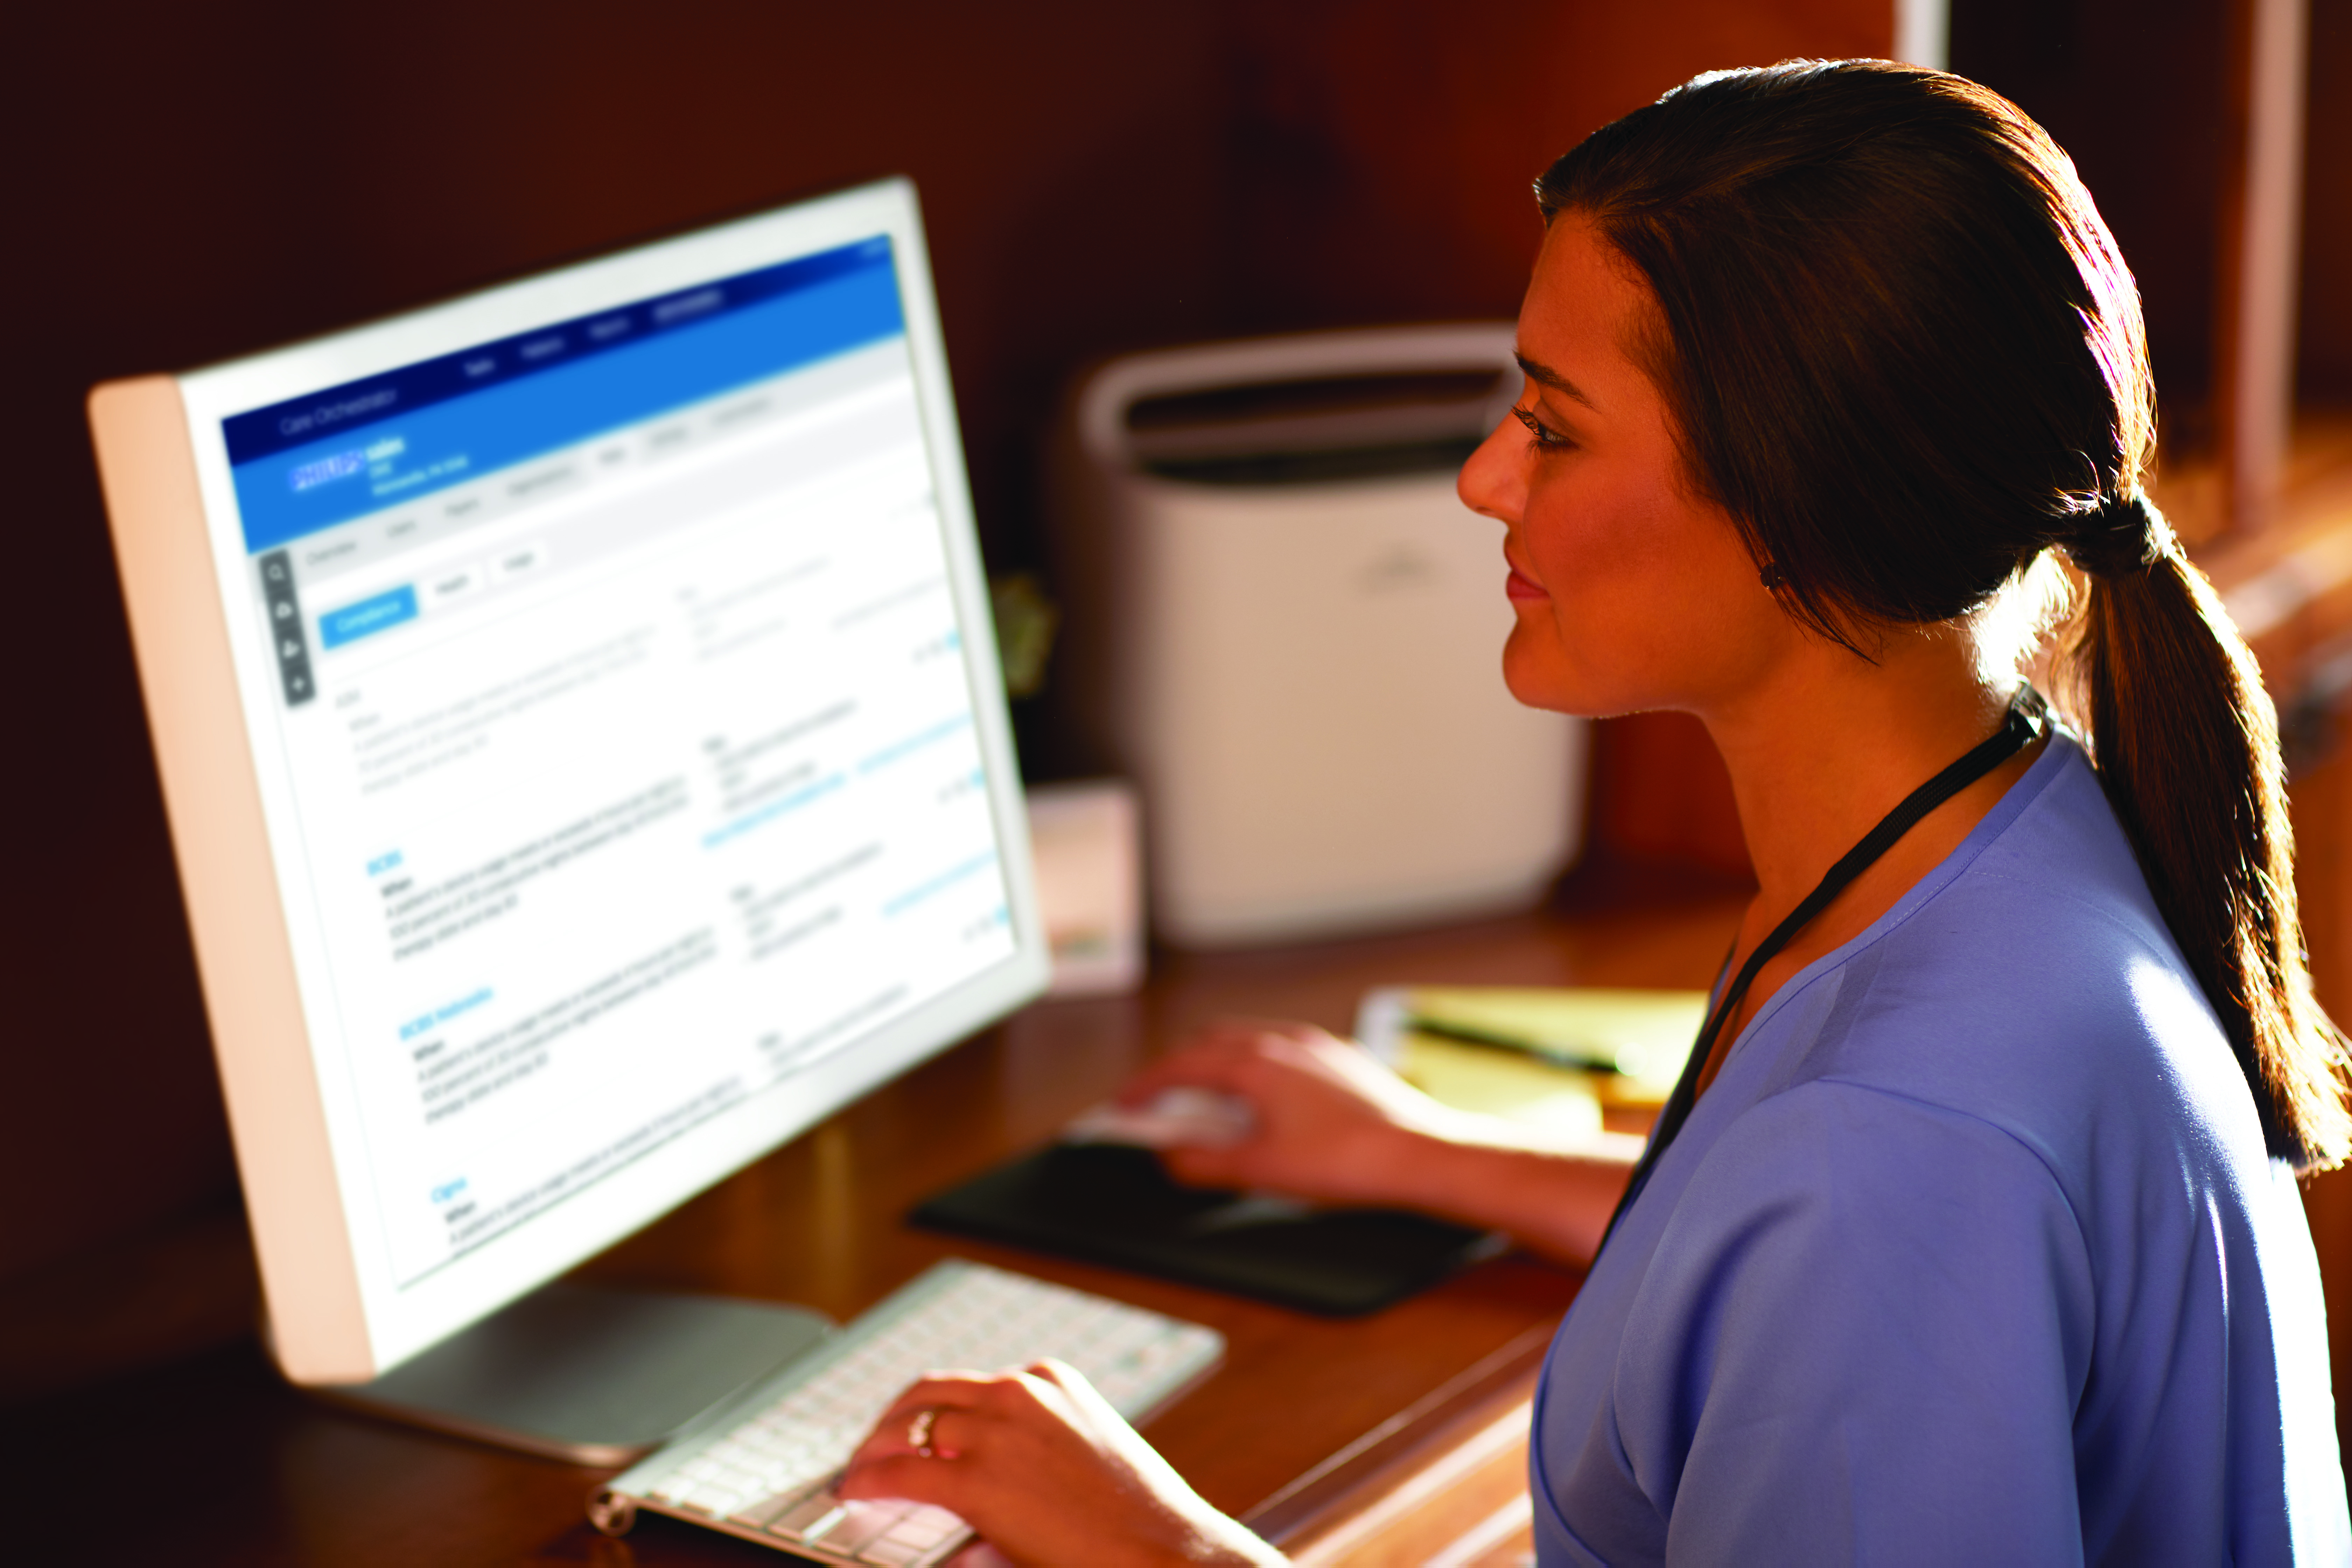 Monitoring patient data to improve patient outcomes